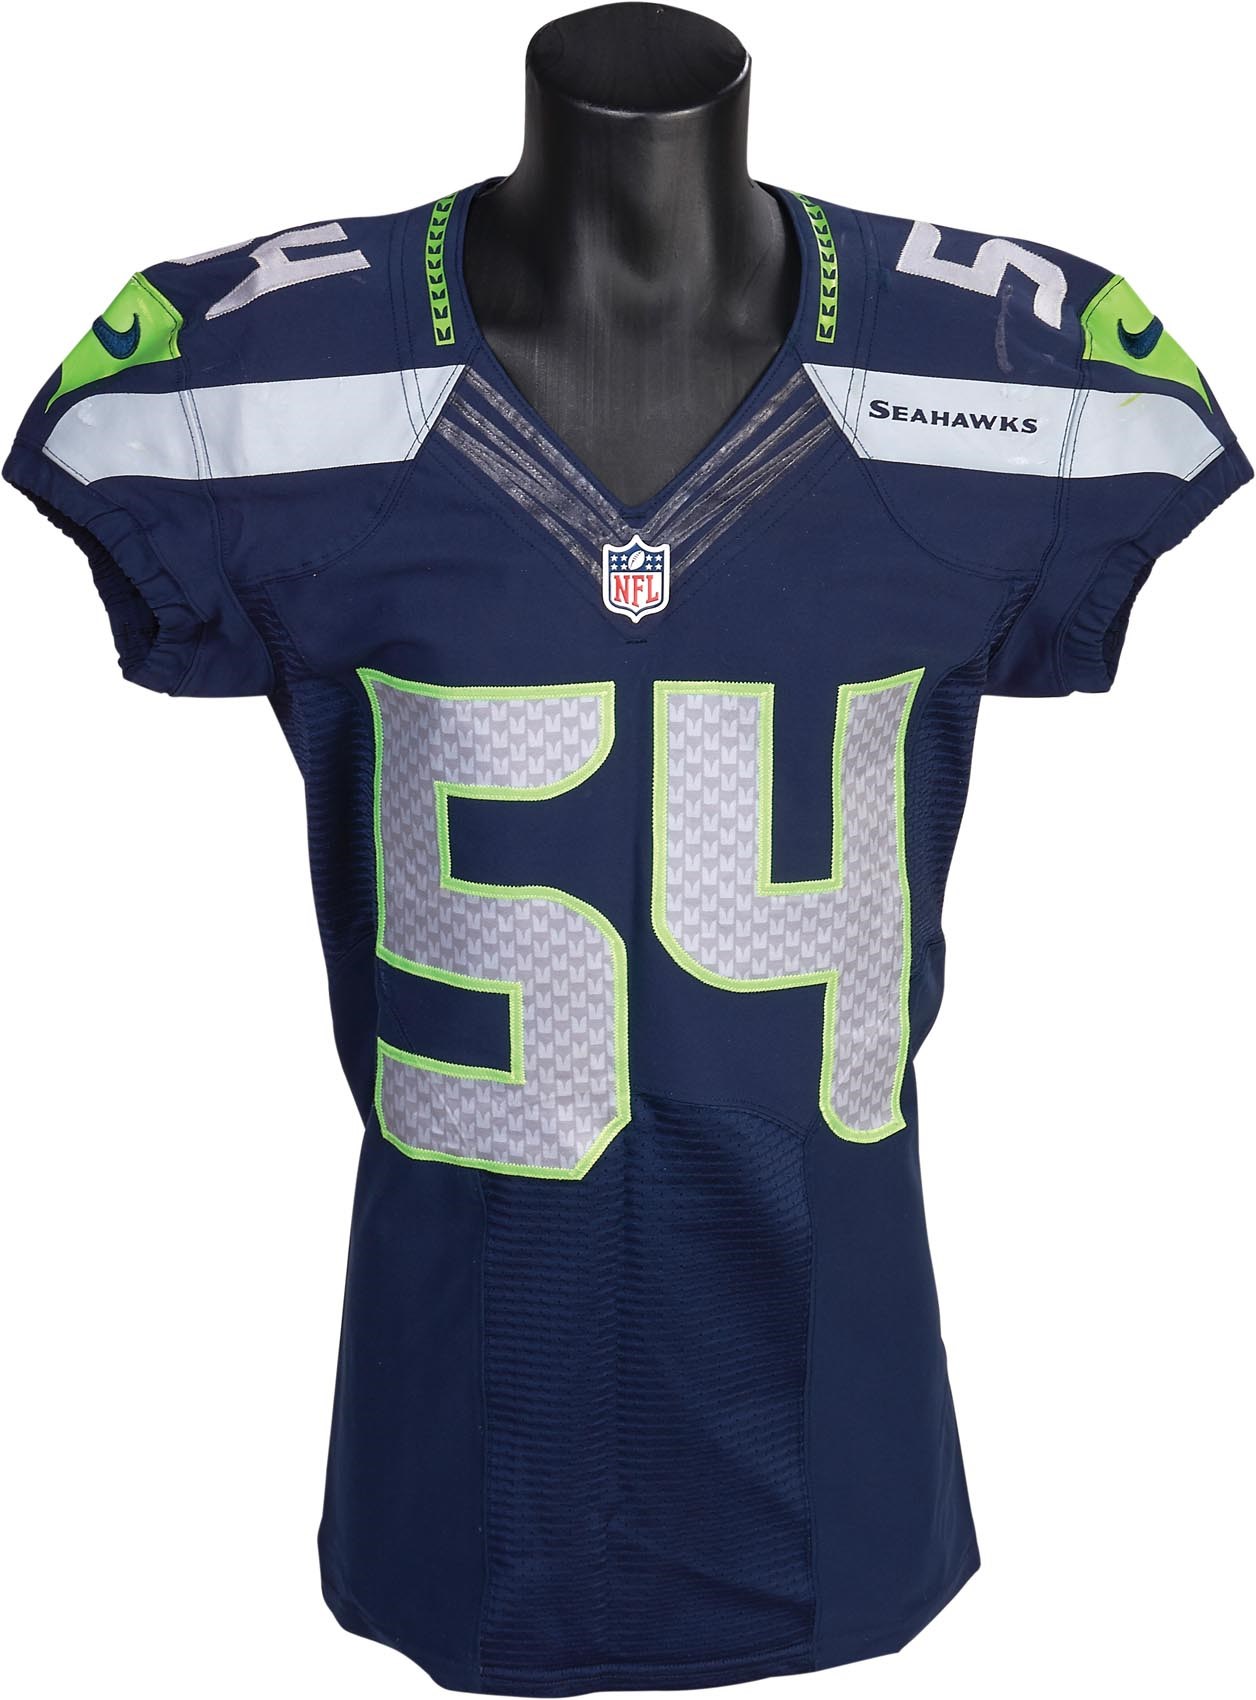 Football - 2012 Bobby Wagner Signed Game Worn Seahawks Jersey